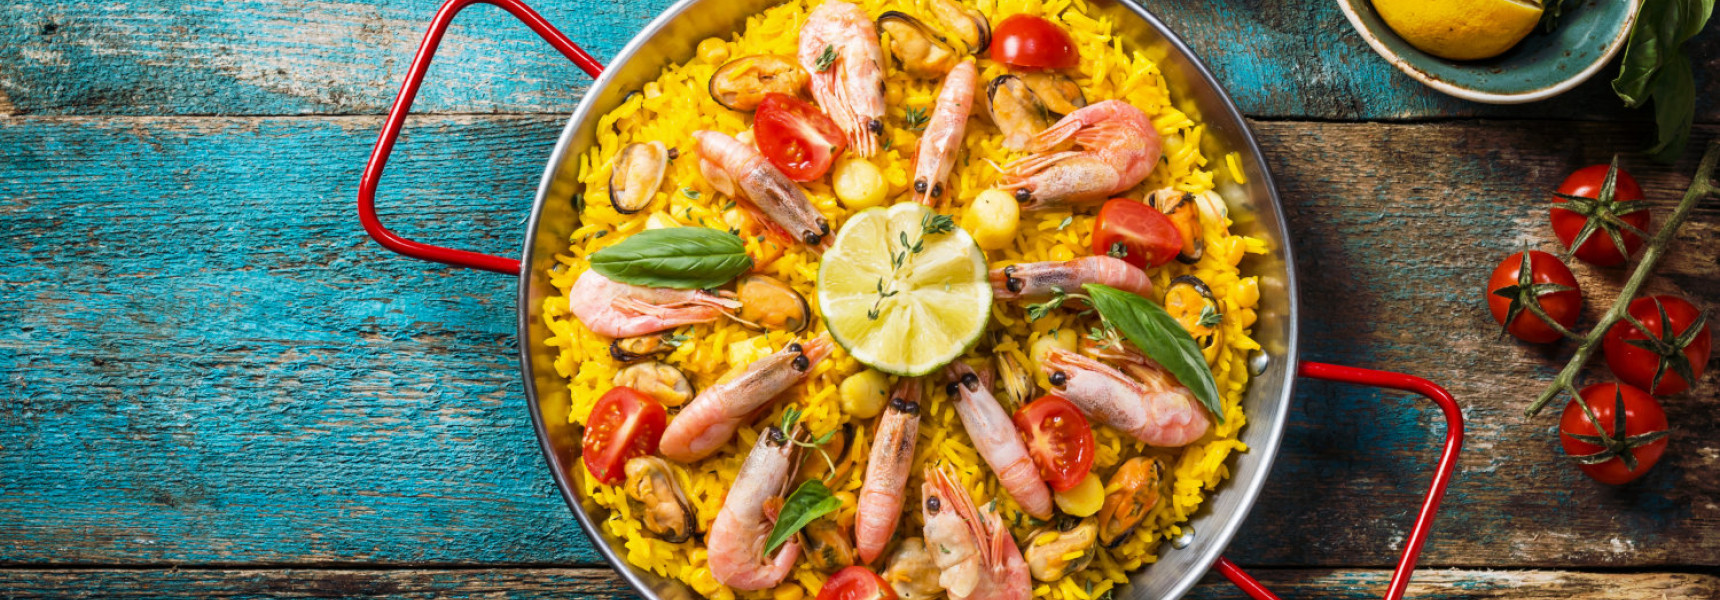 Where to get the Best Paella in Barcelona